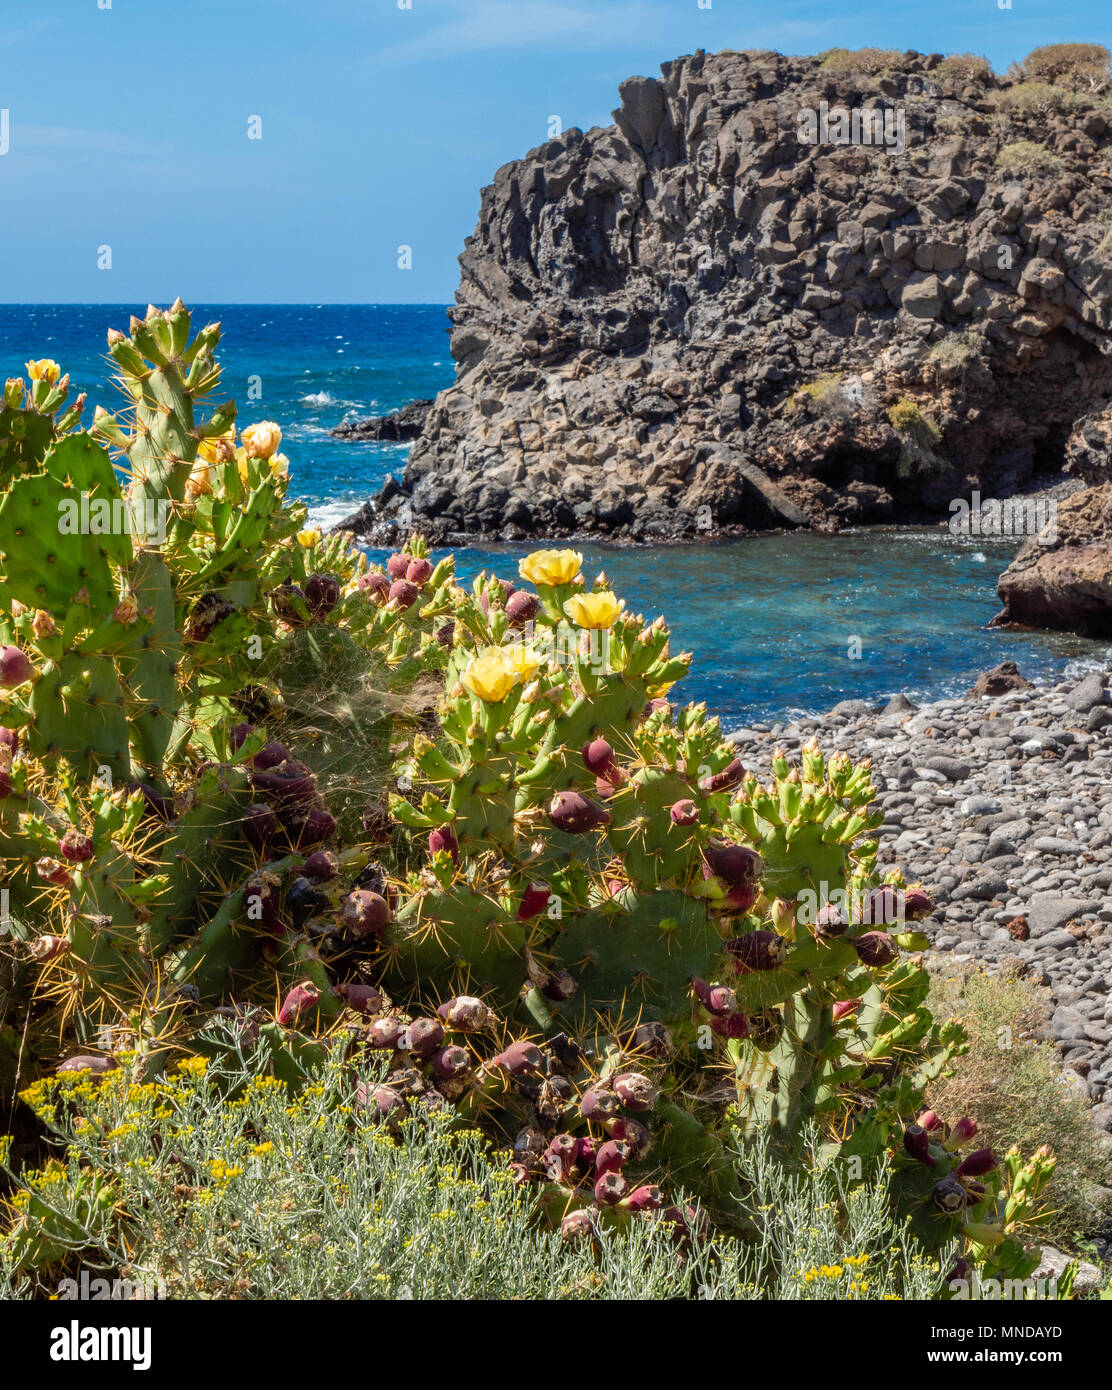 Yellow flowered prickly pear cactus Opuntia stricta dillenii growing on the rocky coast of southern Tenerife in the Canary Islands Stock Photo